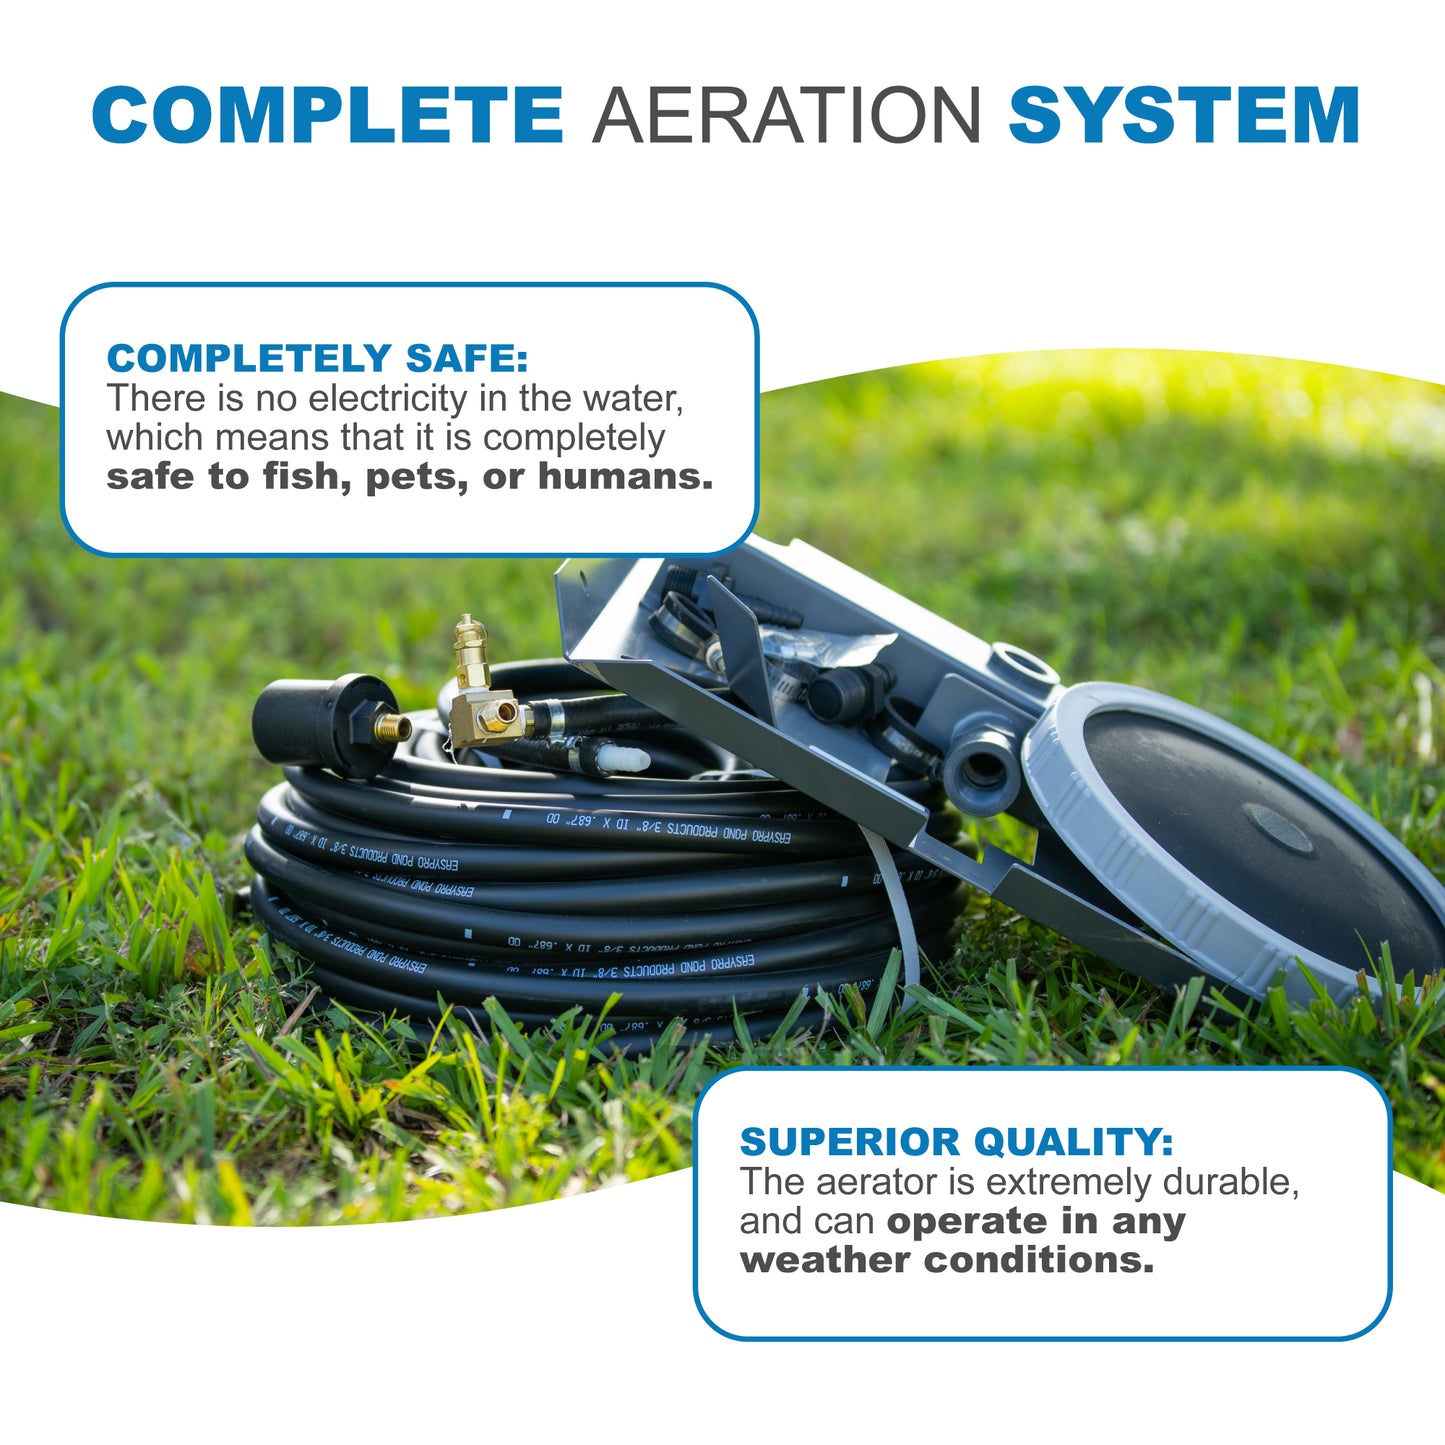 NEW! AirPro Eco 1/2 HP Rocking Piston Pond Aerator Kit - For Ponds up to 2 Acres